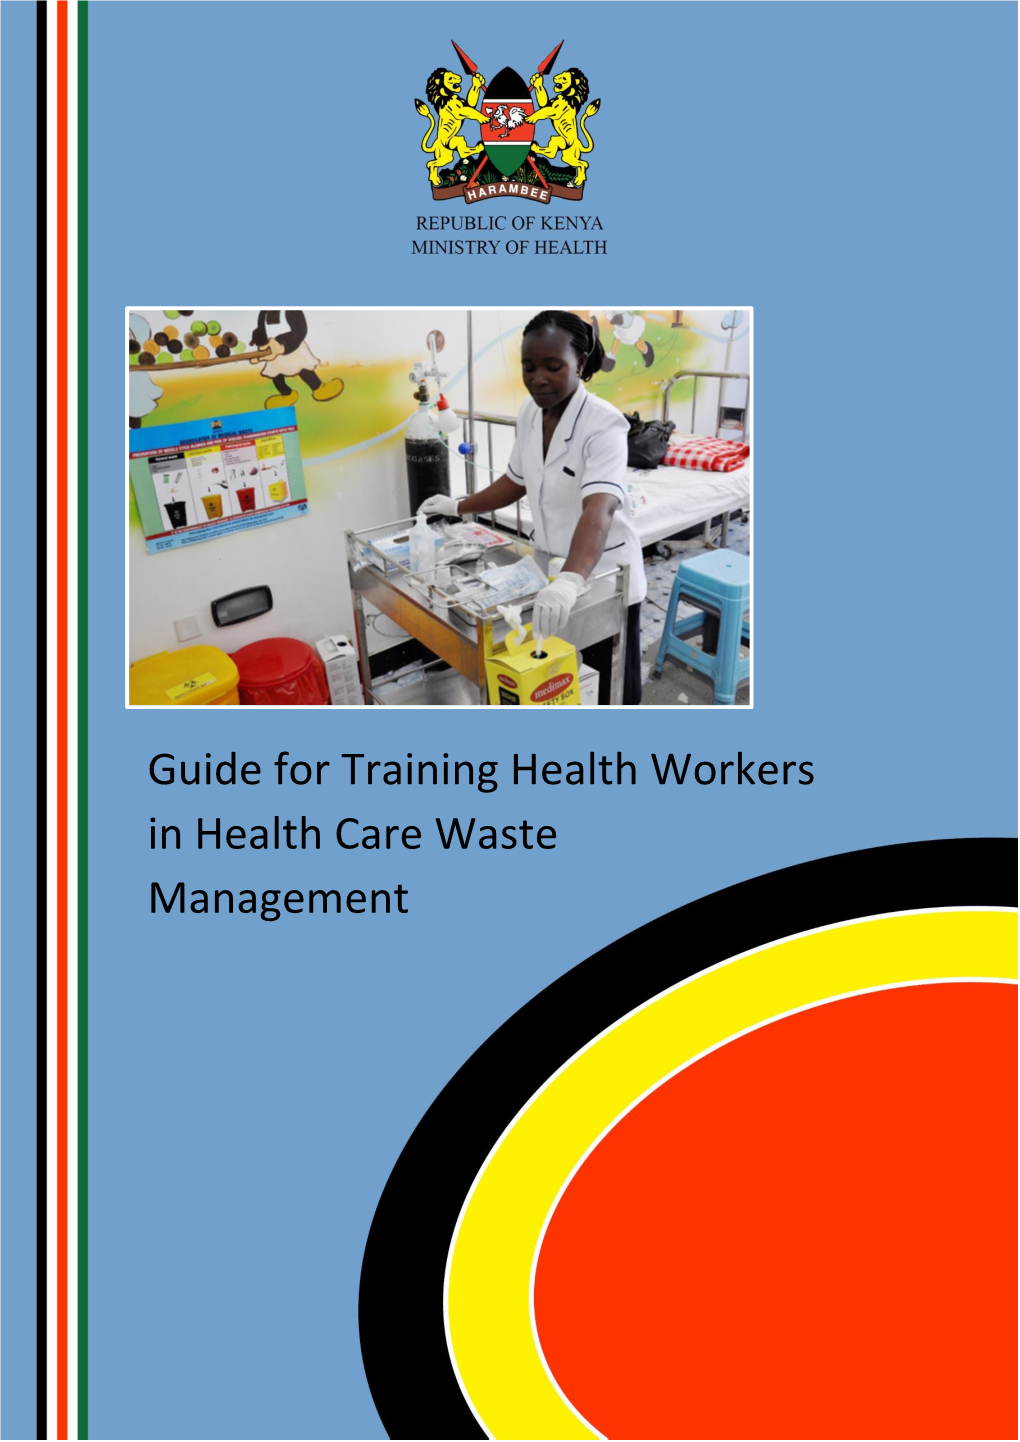 Guide for Training Health Workers in Health Care Waste Management